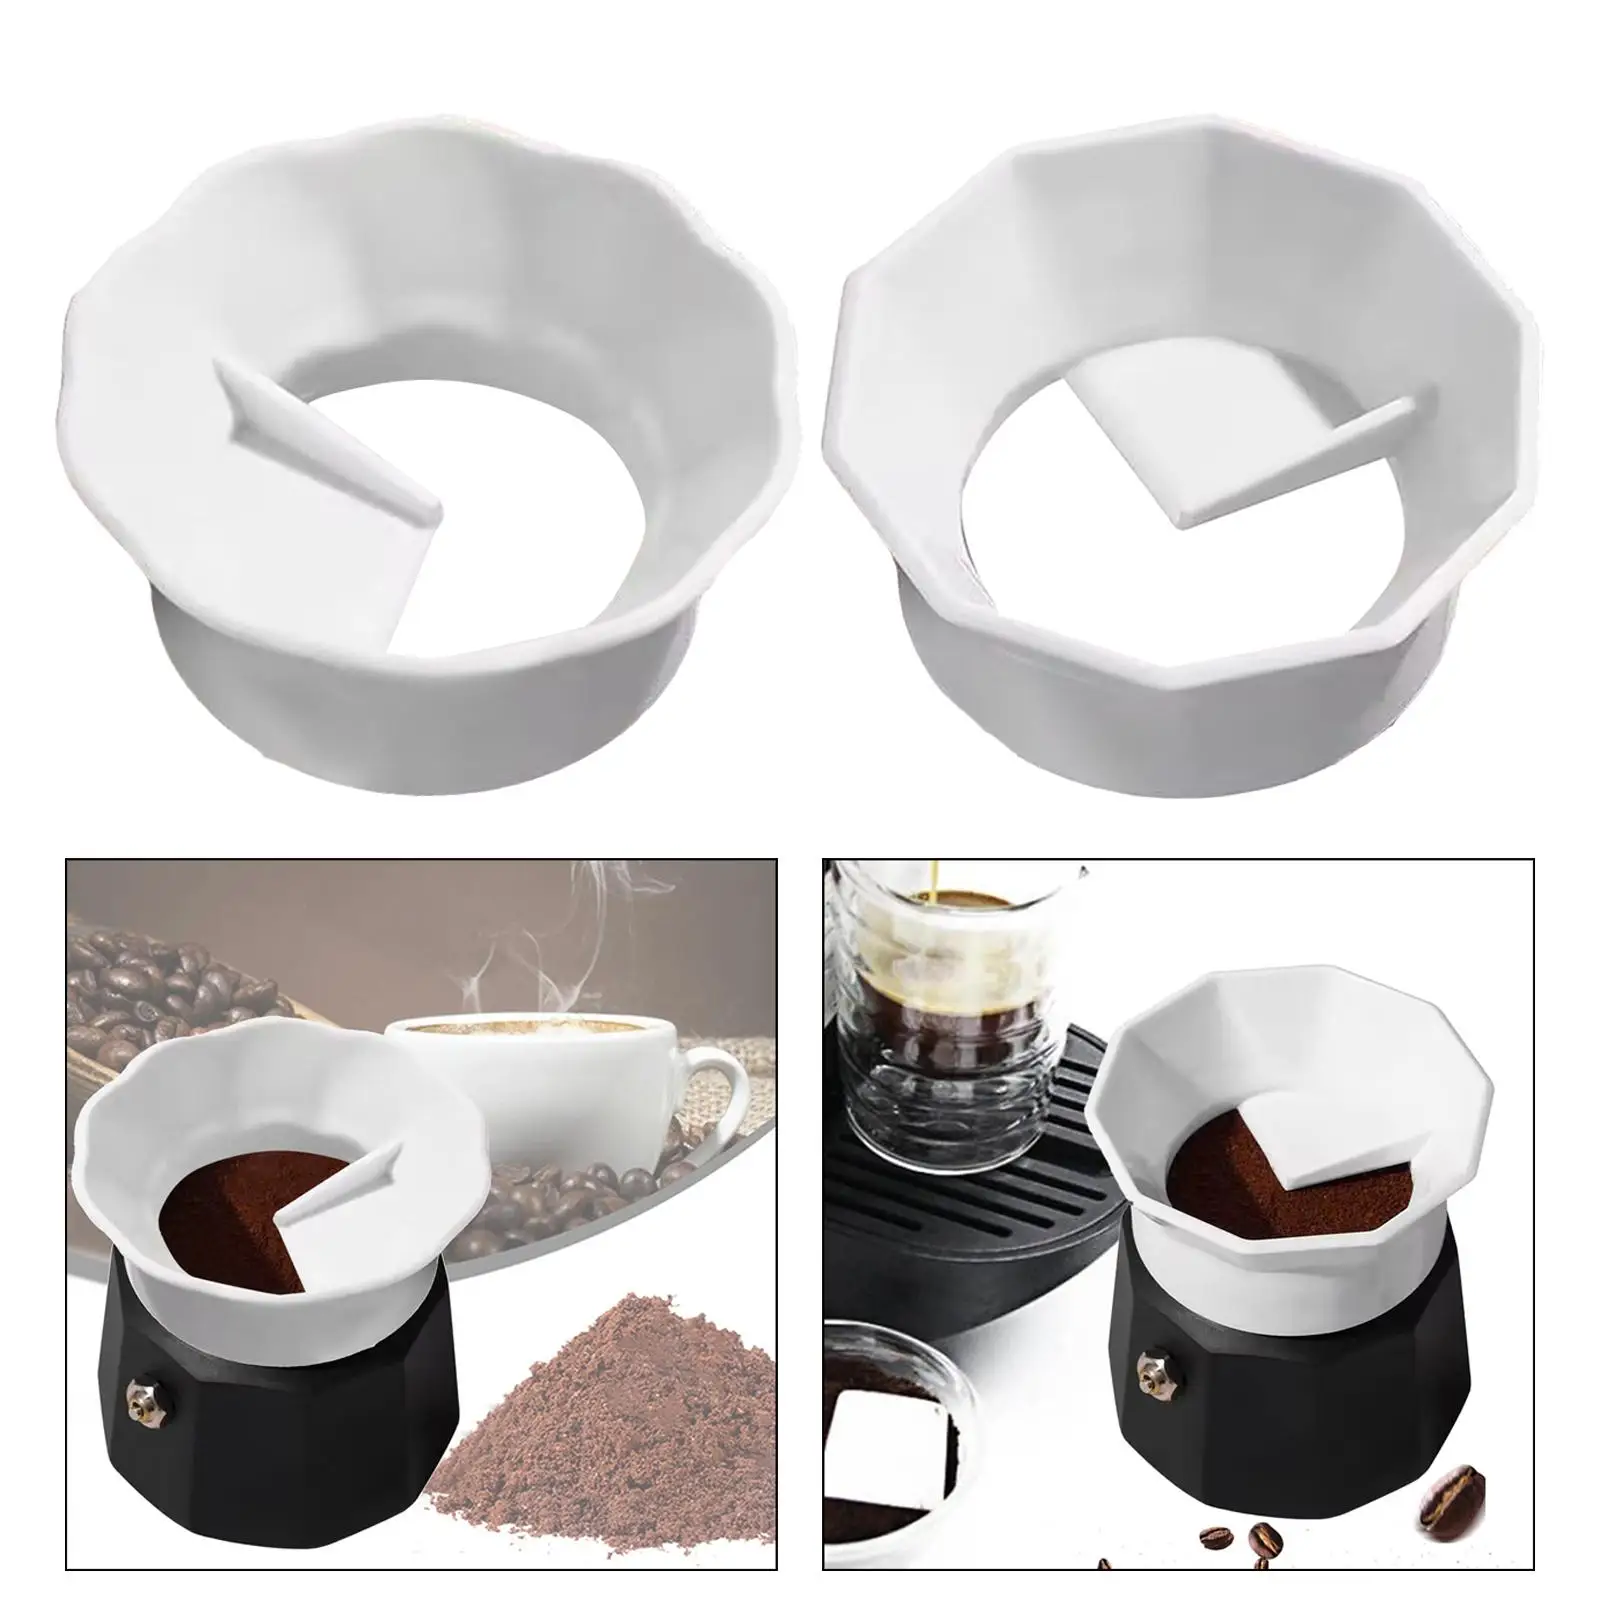 Rotary Powder Dosing Rings Replacement Coffee Ware Accs Coffee Distributor Leveler for Coffee Maker Pot Office Kitchen Espresso